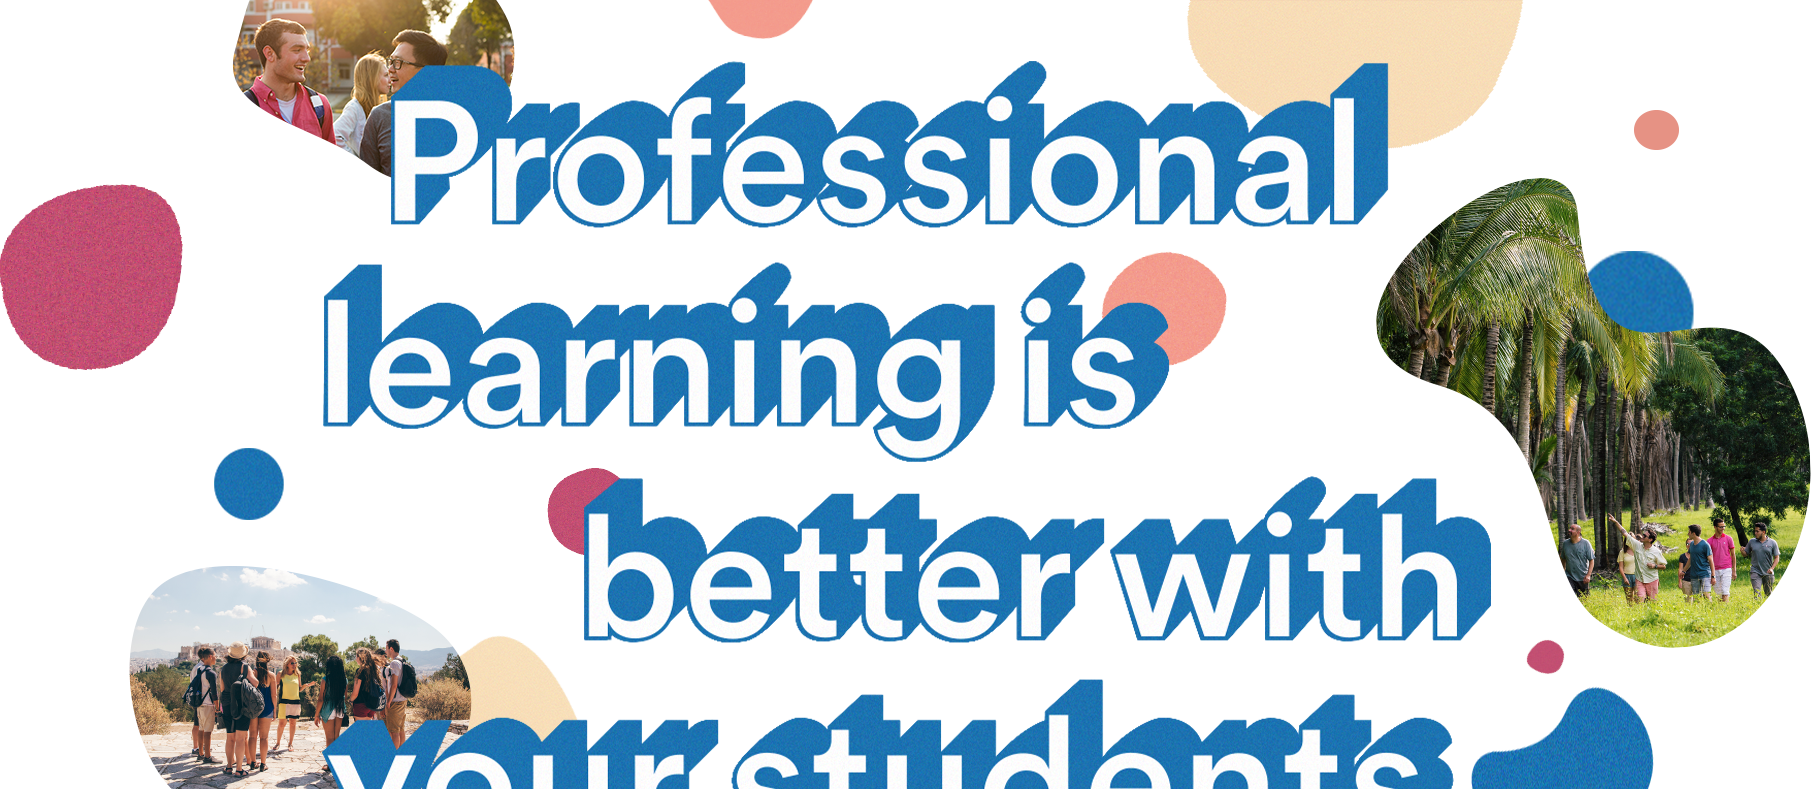 professional learning in education image